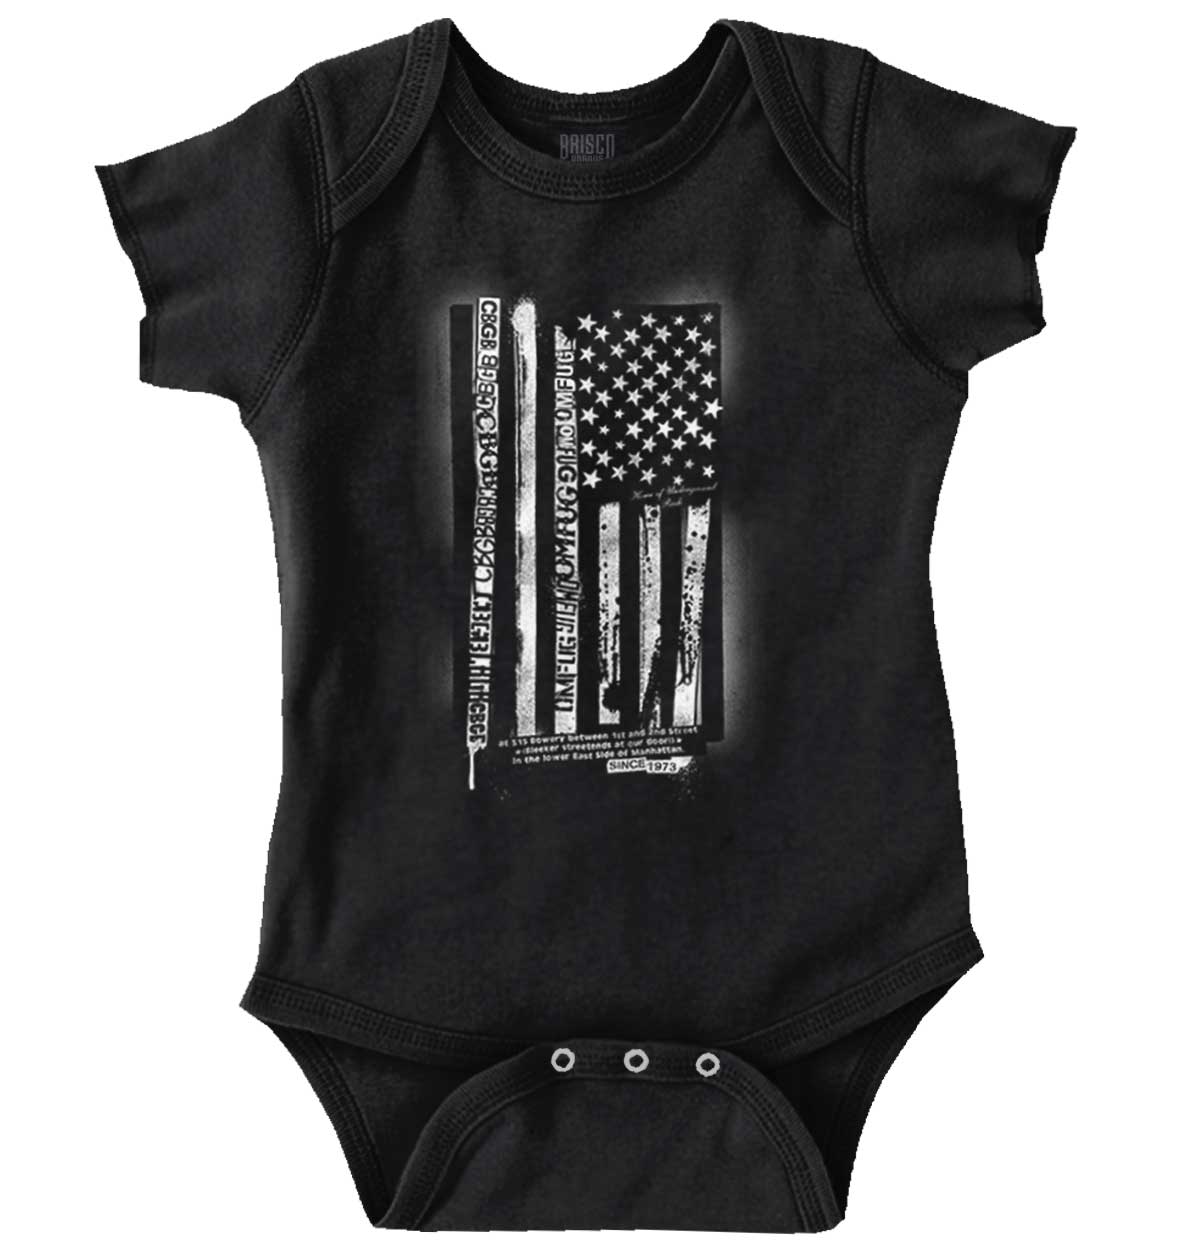 CBGB United States Of Punk Rock American Romper Boys or Girls Infant Baby Brisco Brands 12M - image 1 of 6